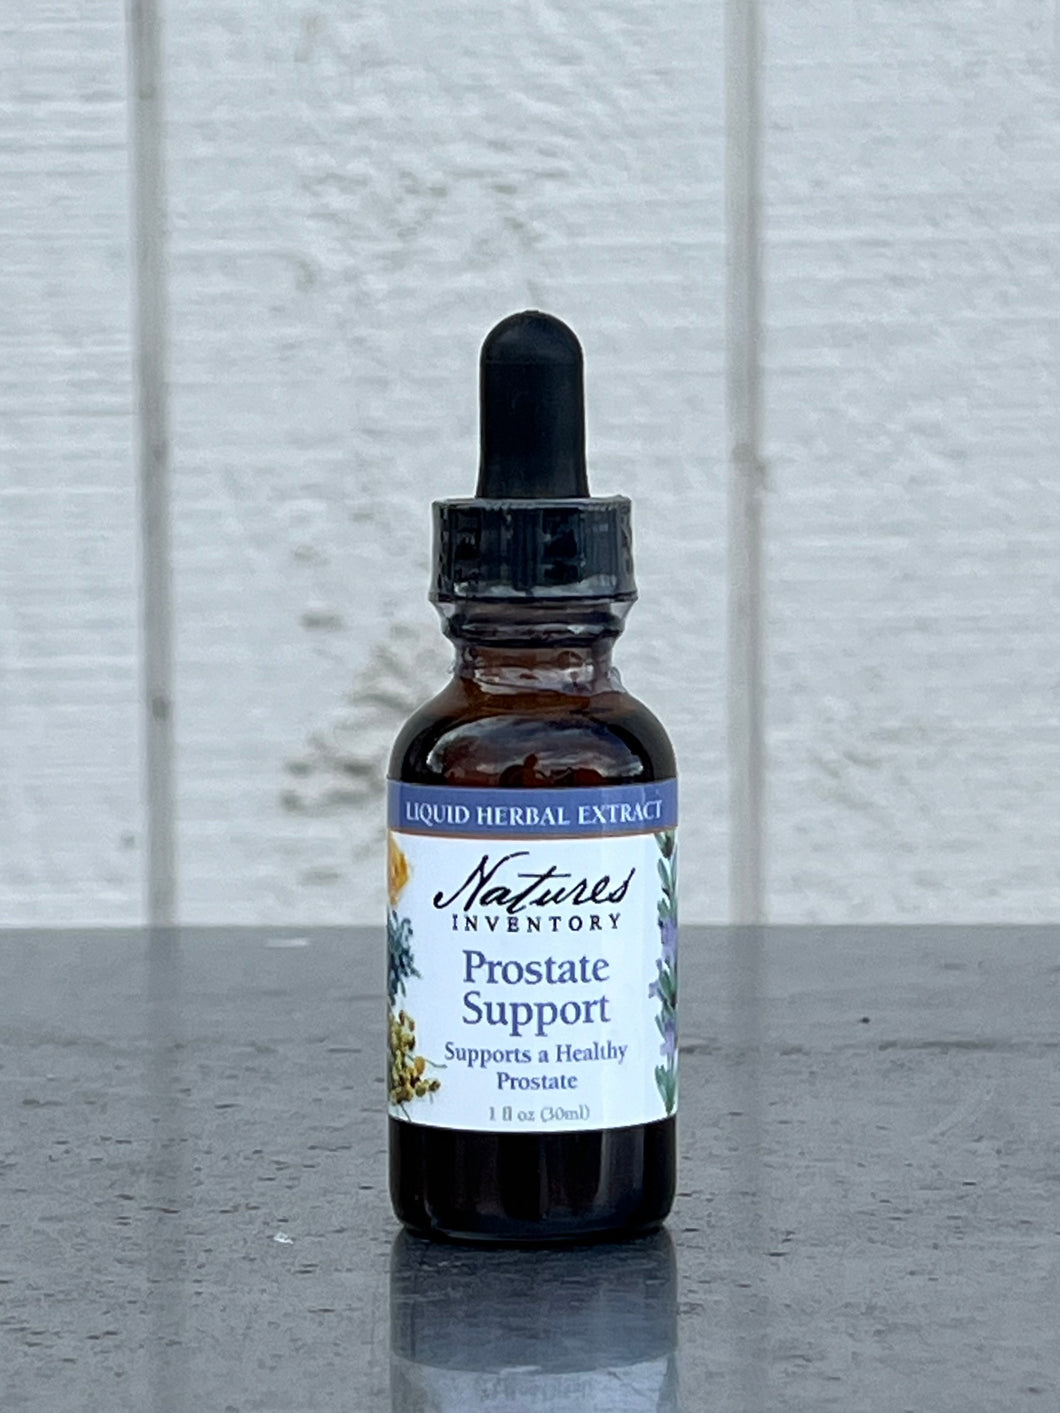 Prostate Support Tincture